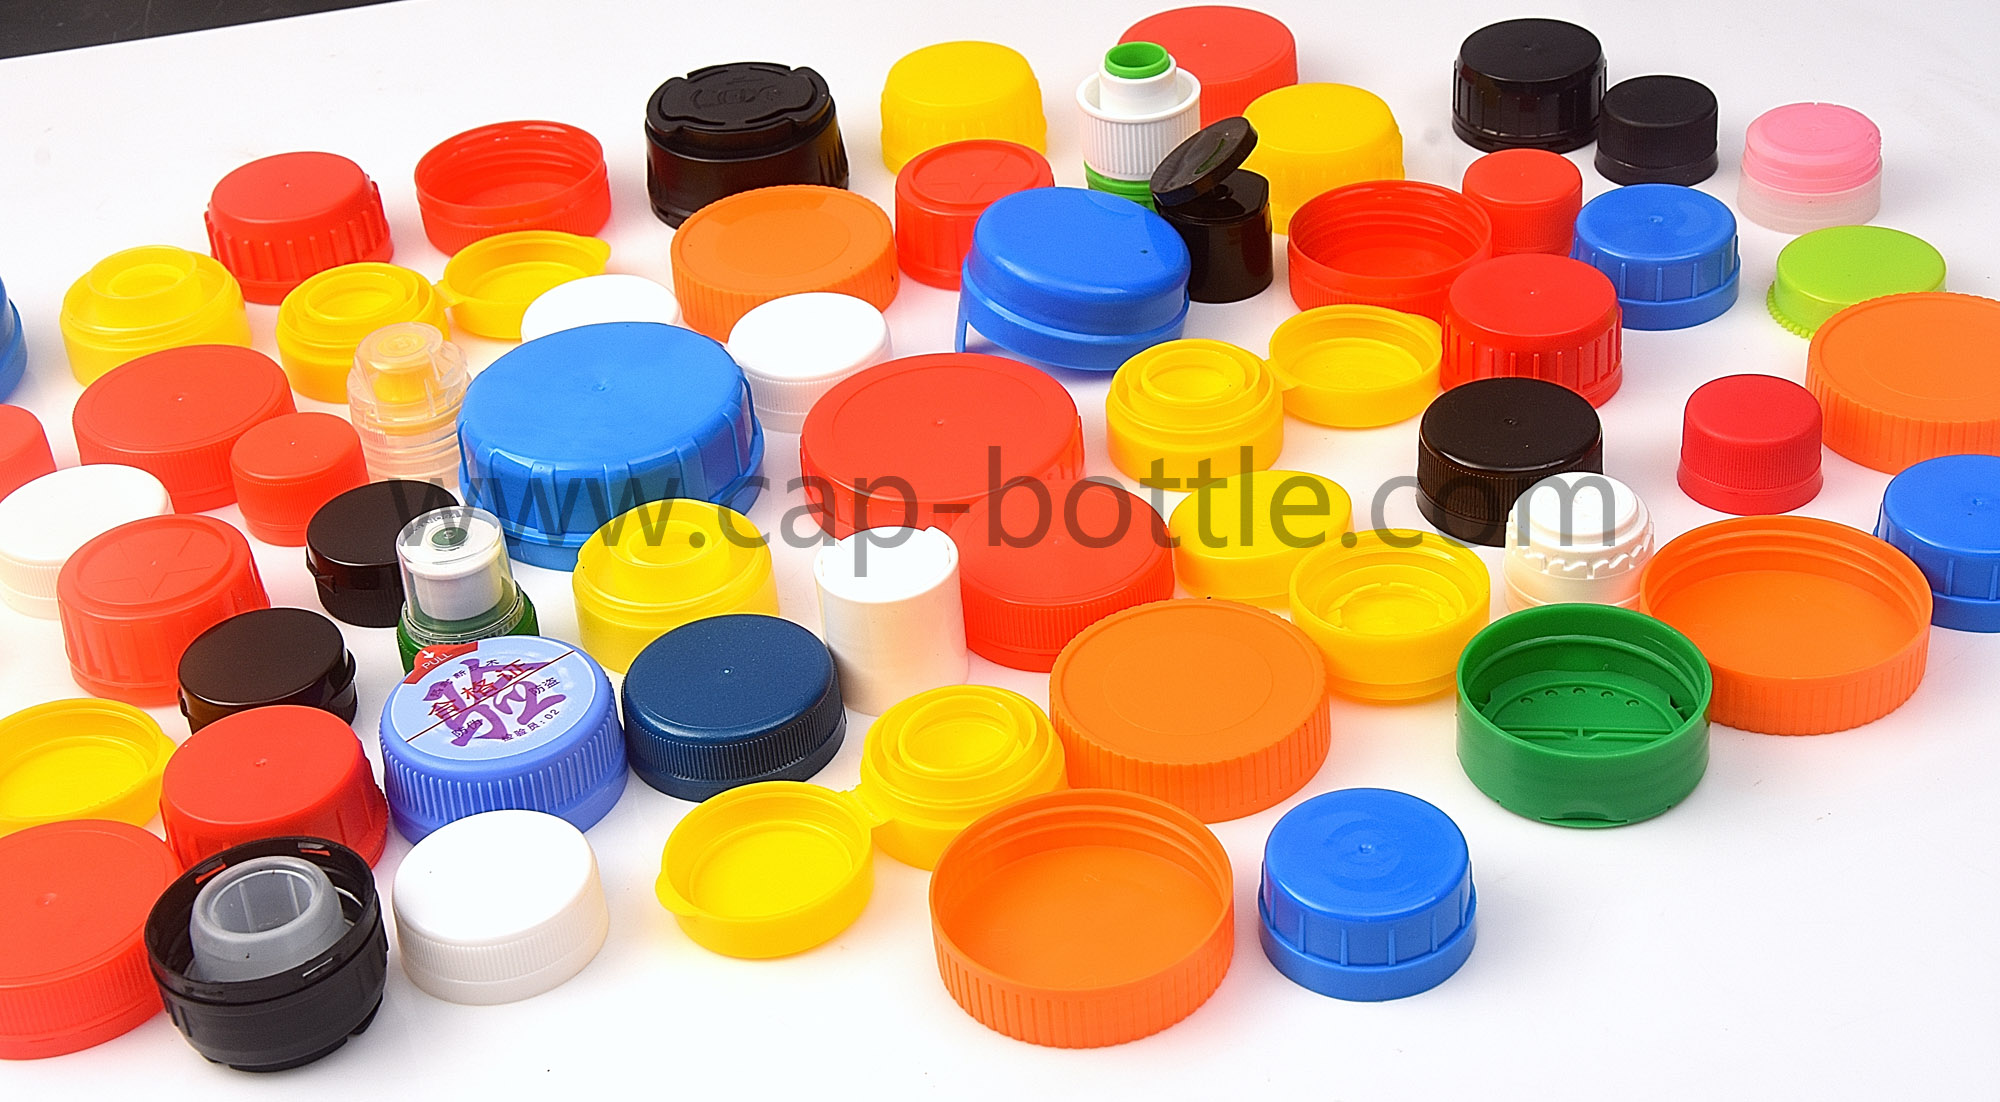 We are more professional in making bottle caps!